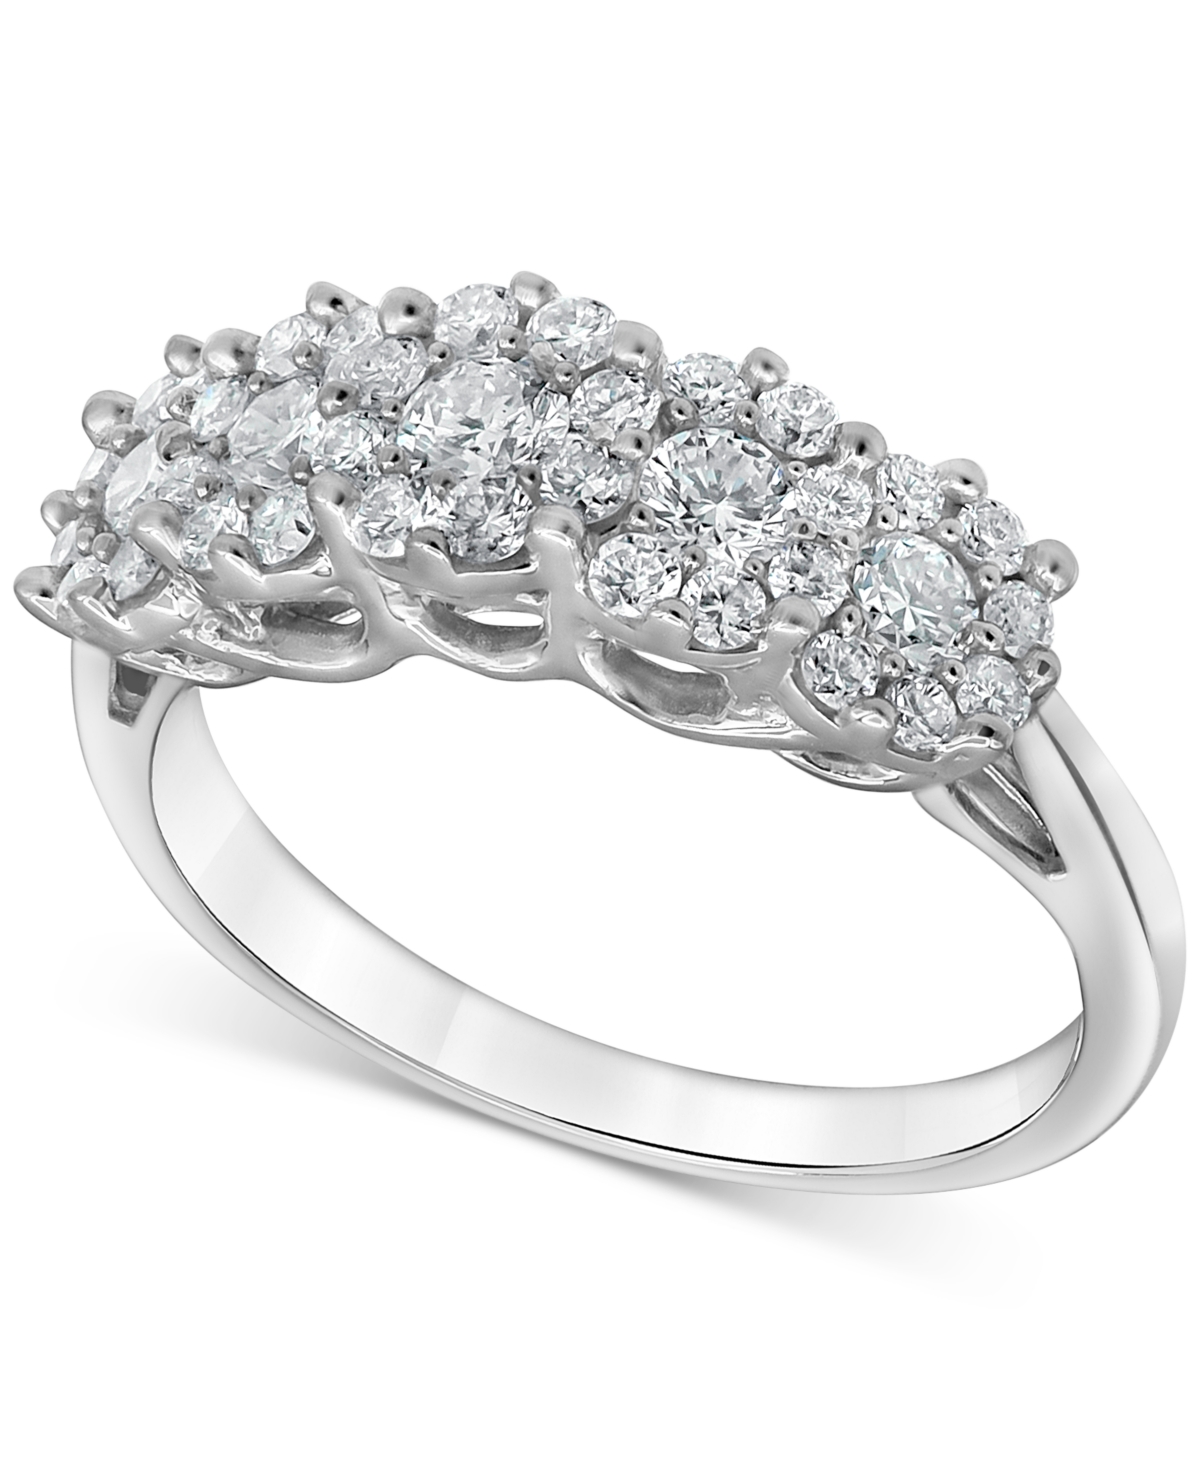 Lab-Created Diamond Horizontal Cluster Statement Ring (1 ct. t.w.) in Sterling Silver - White Gold